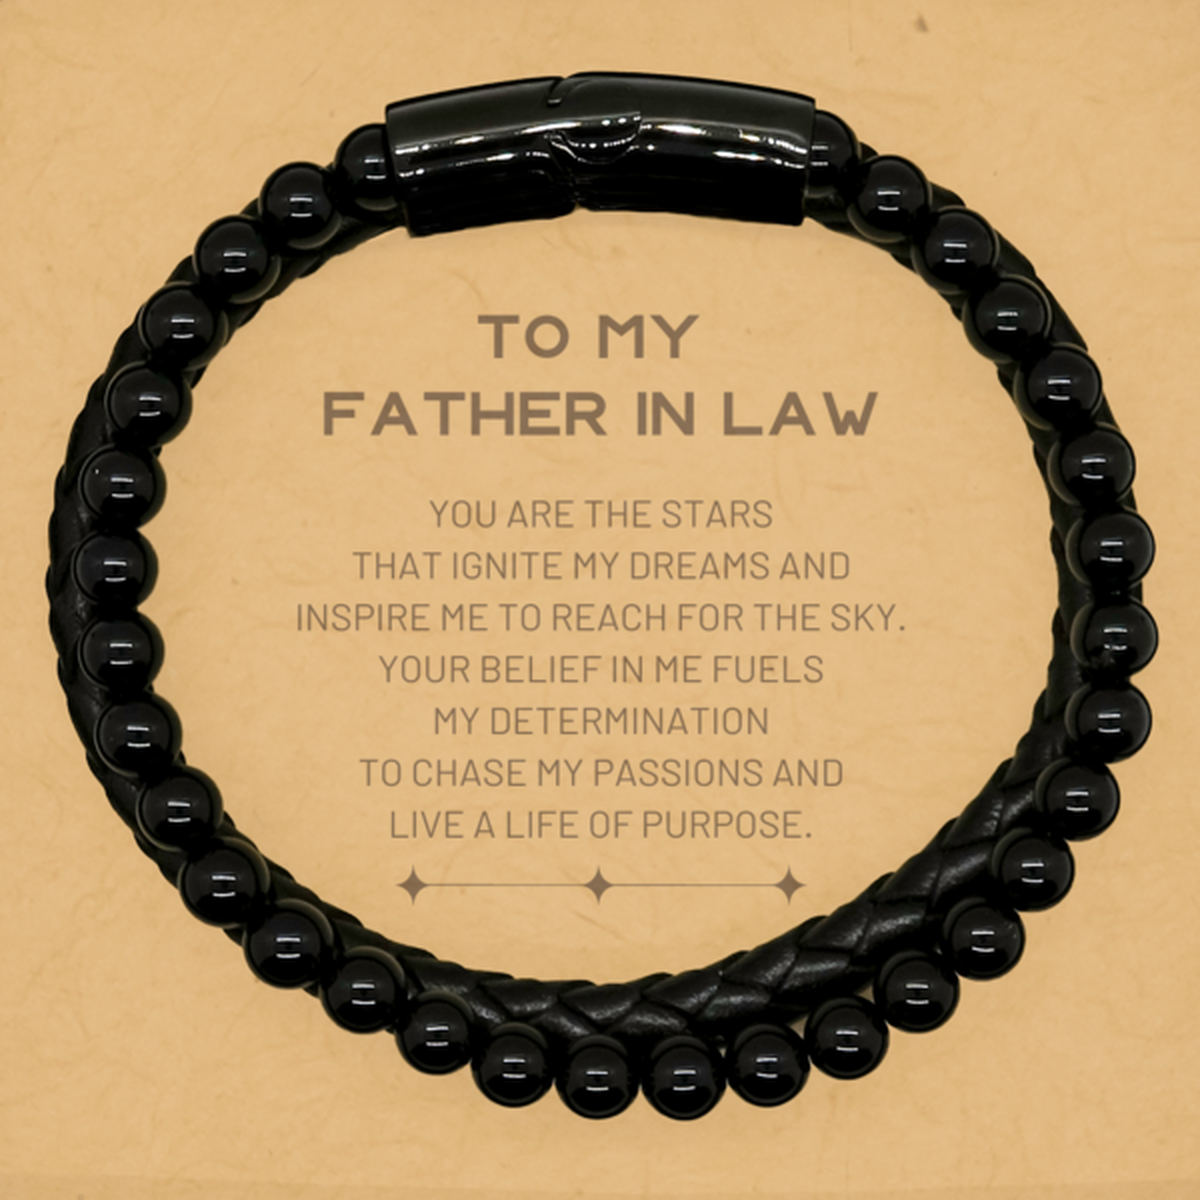 To My Father In Law Stone Leather Bracelets, You are the stars that ignite my dreams and inspire me to reach for the sky, Birthday Unique Gifts For Father In Law, Thank You Gifts For Father In Law